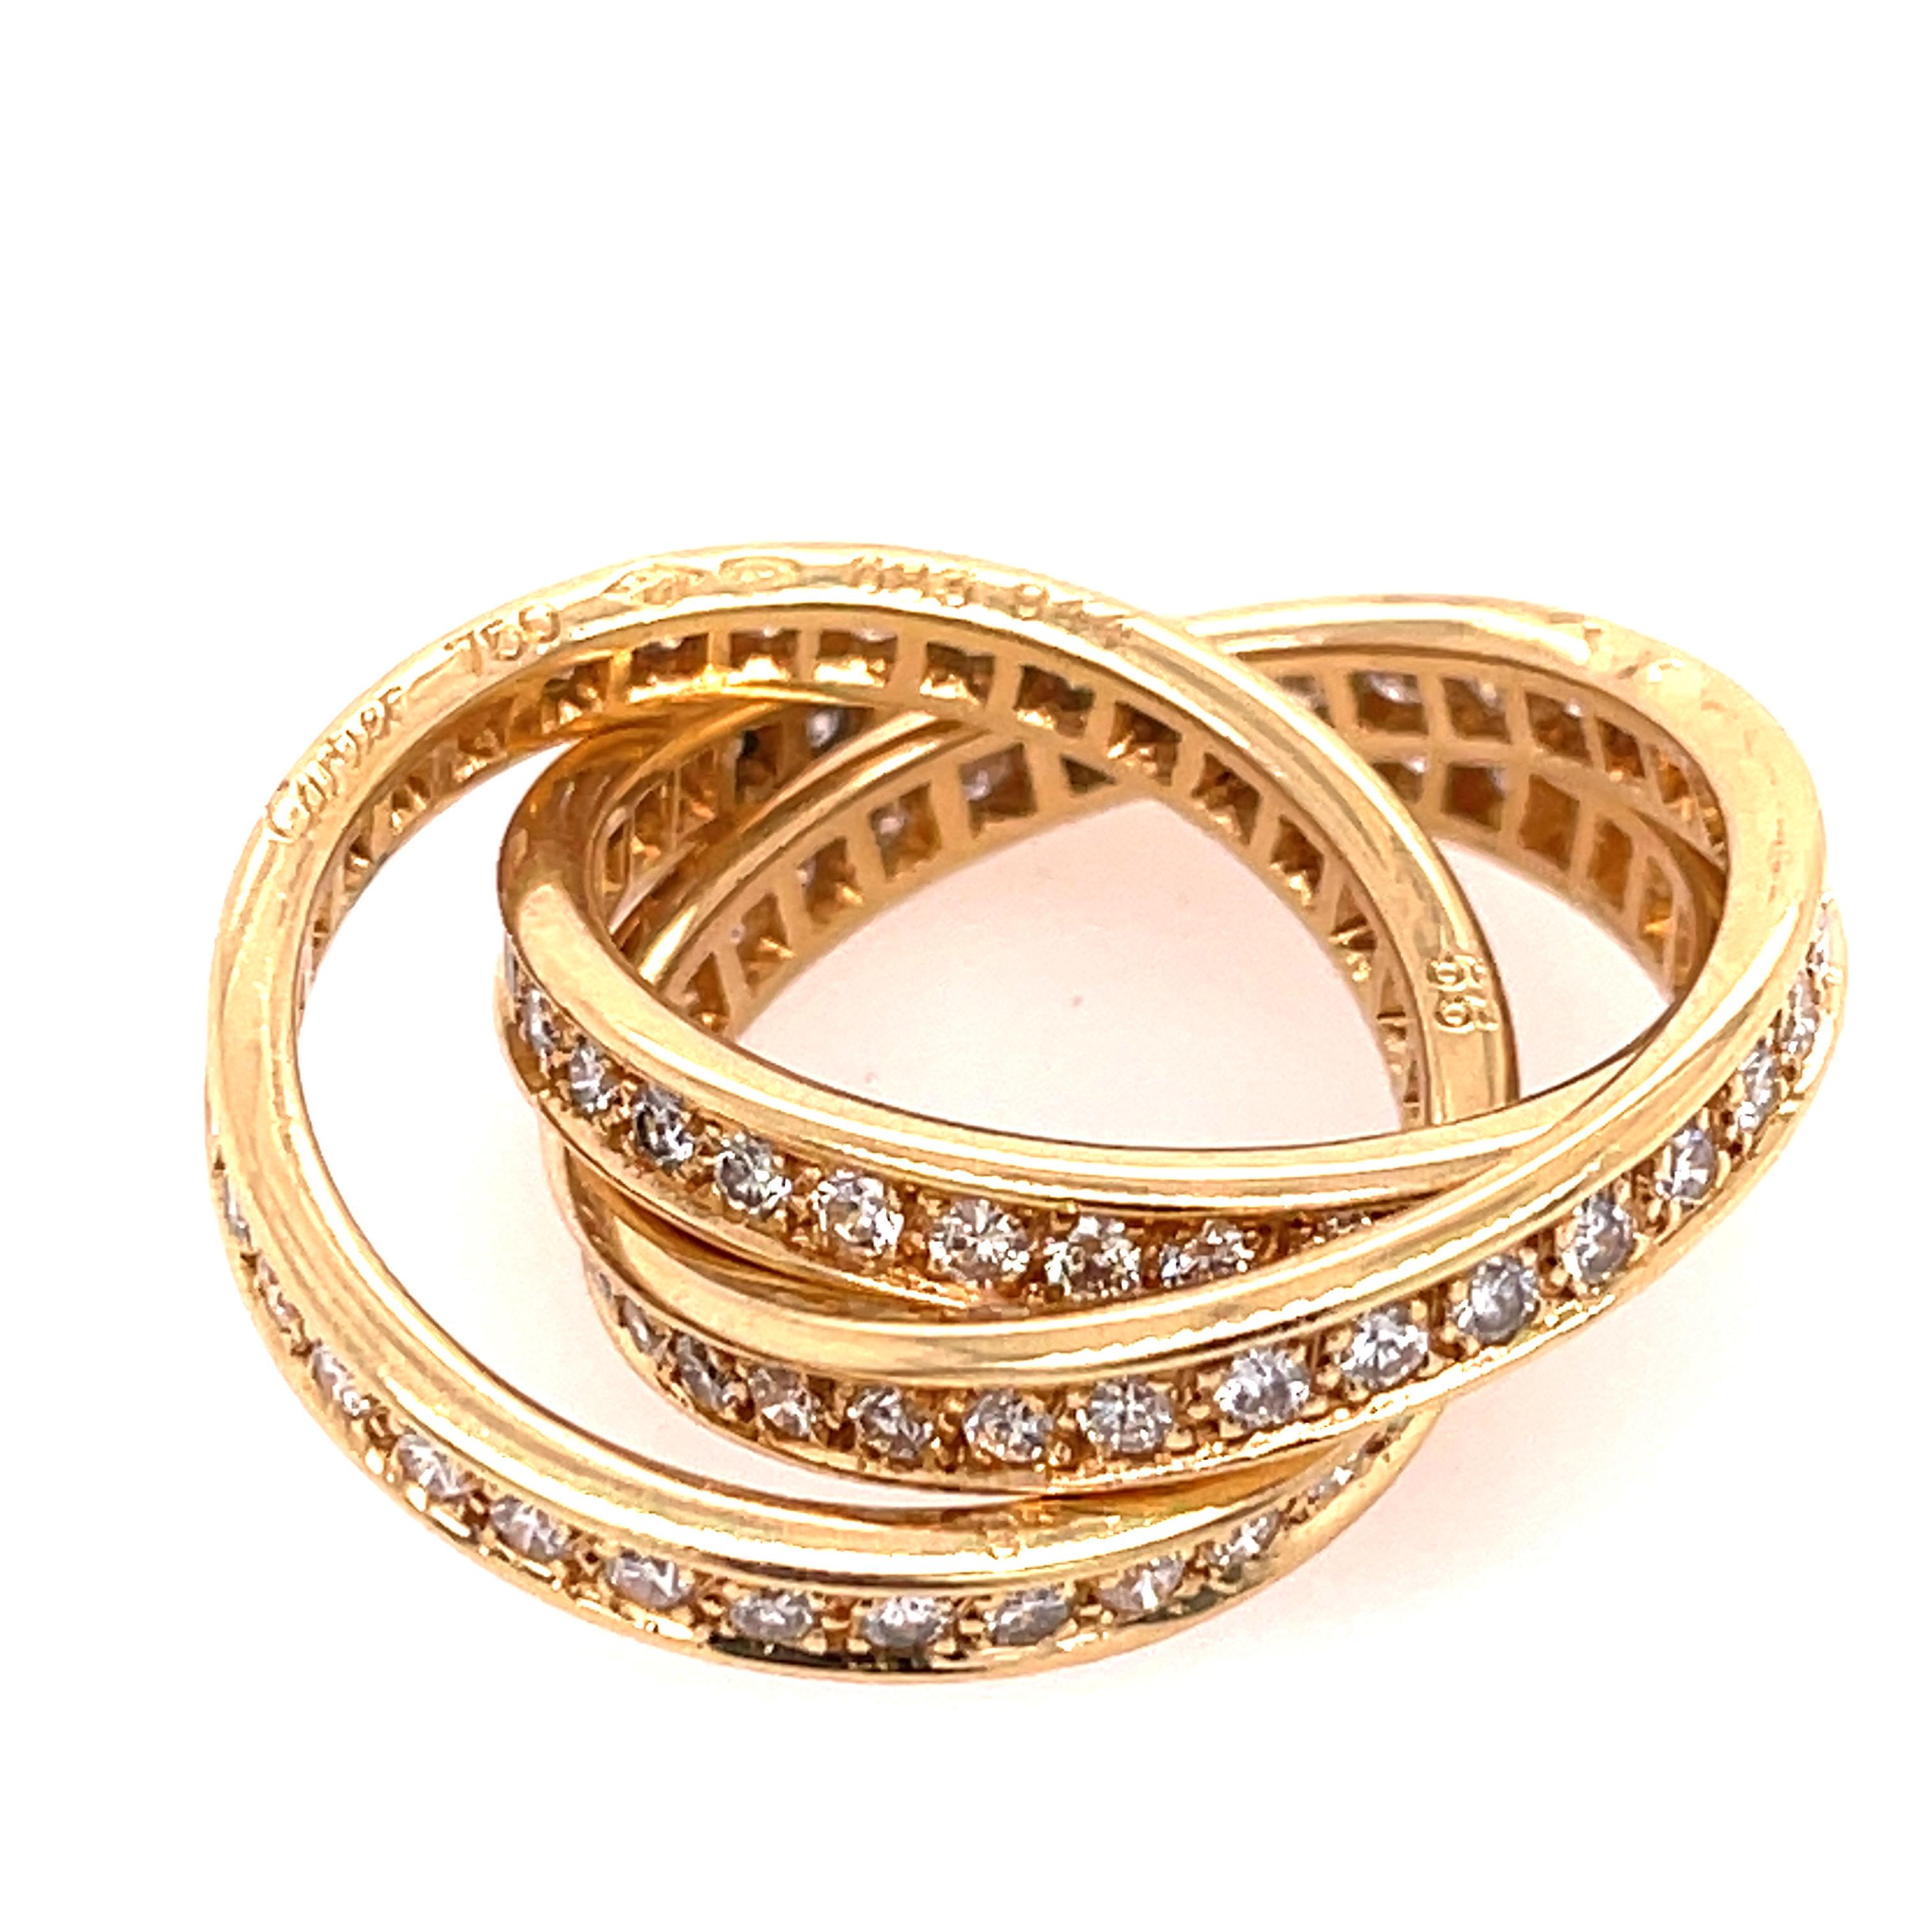 Cartier Trinity Ring in 18K Yellow Gold. The rings feature approximately 1.55ctw of brilliant cut round diamonds. Ring size 7.